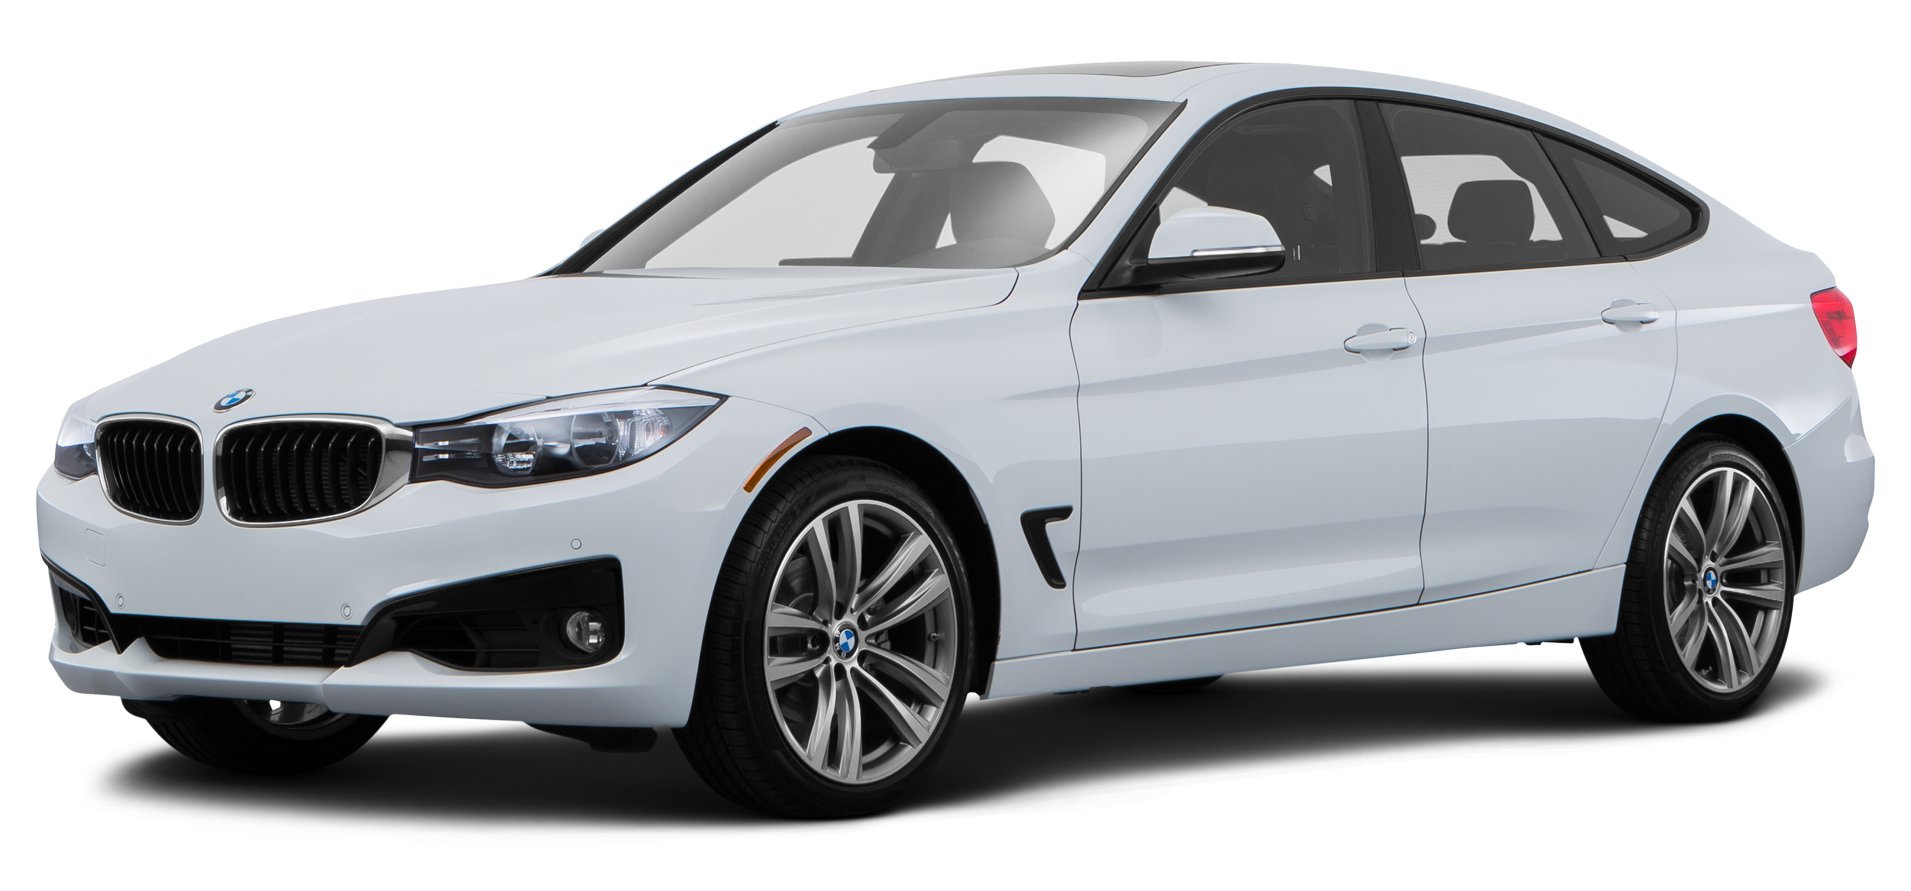  BMW 328I-Gt-Xdrive oem parts and accessories on sale